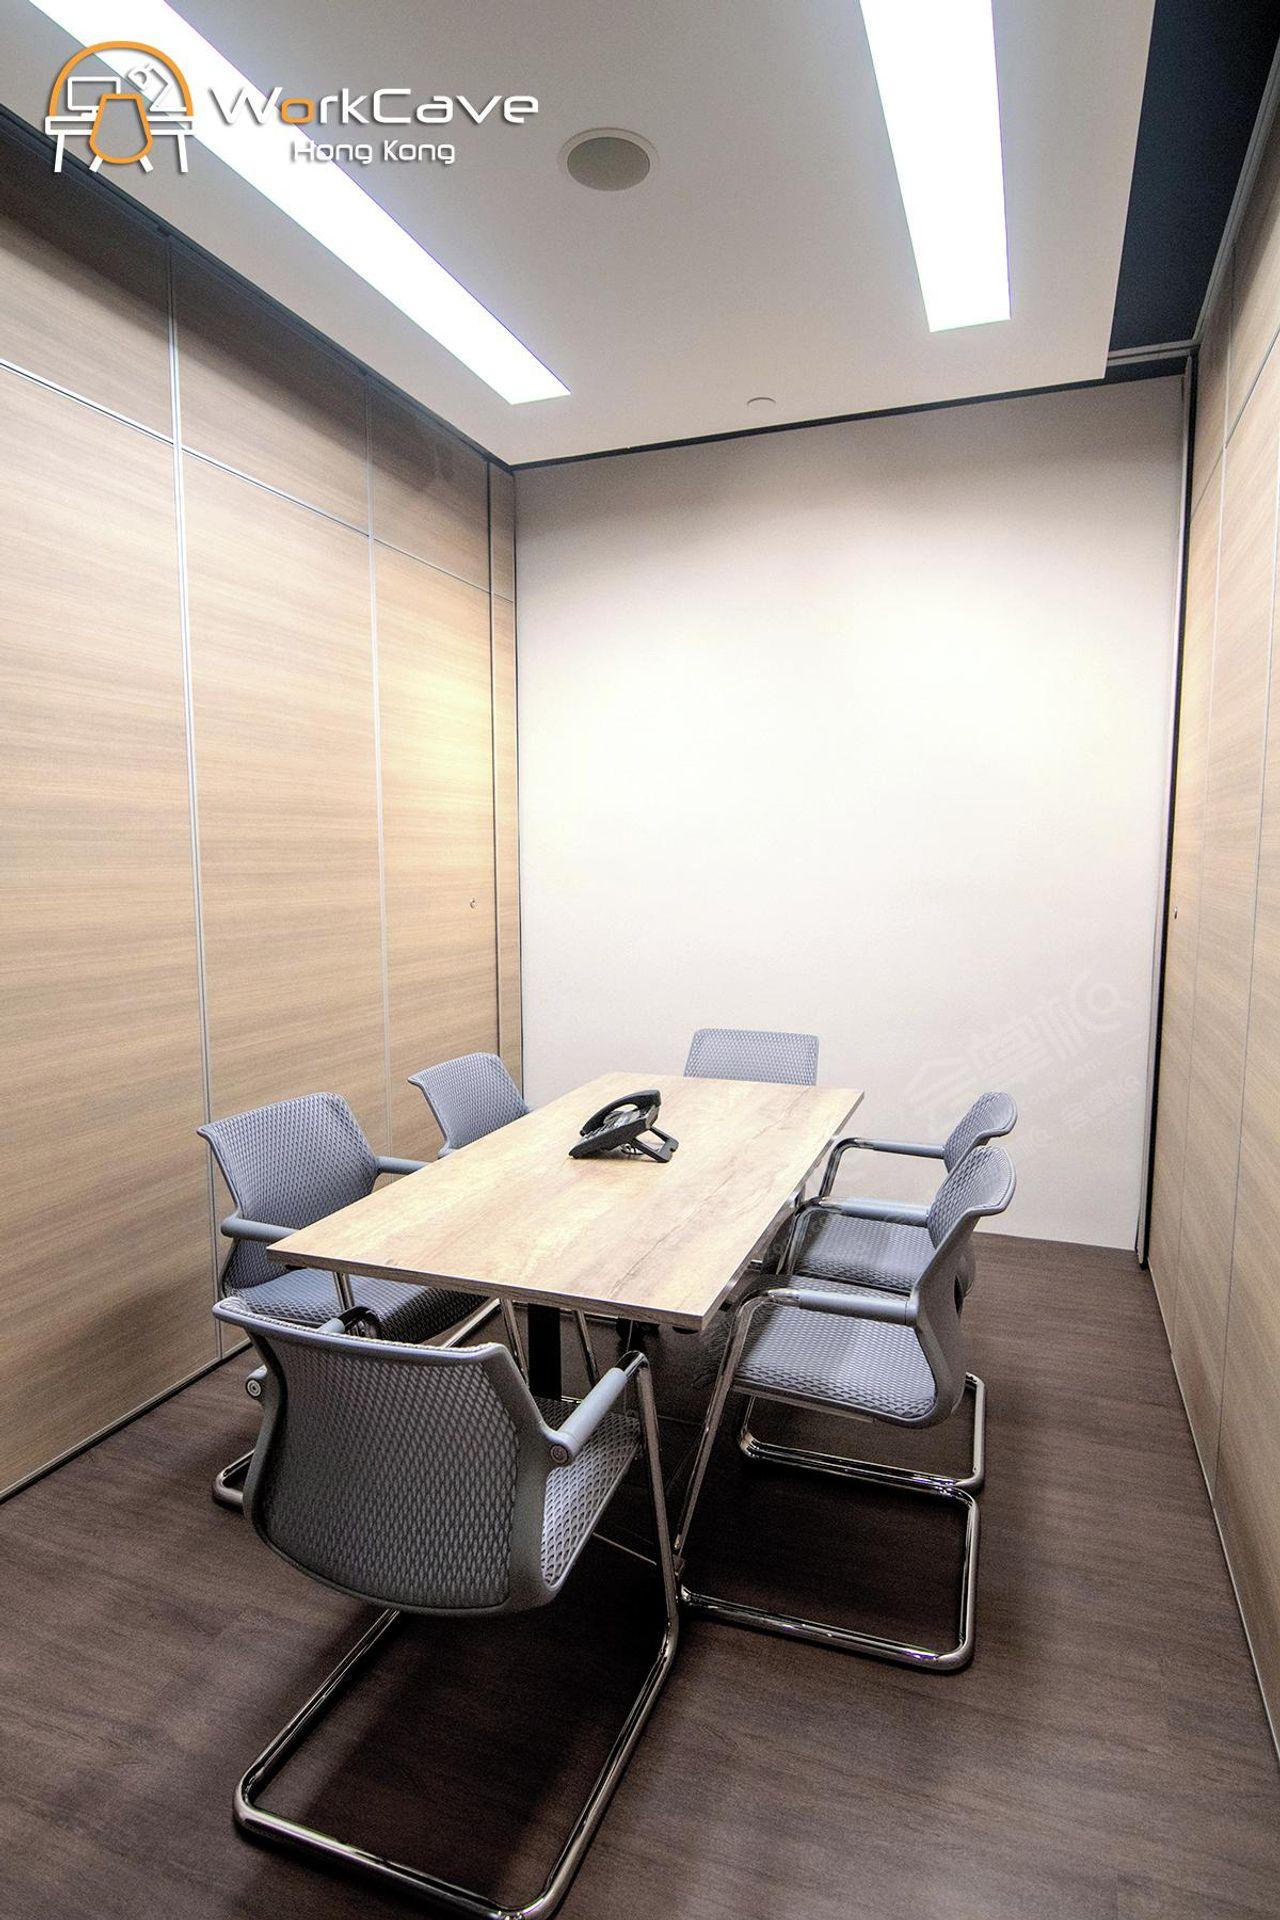 6 Pax Conference Room